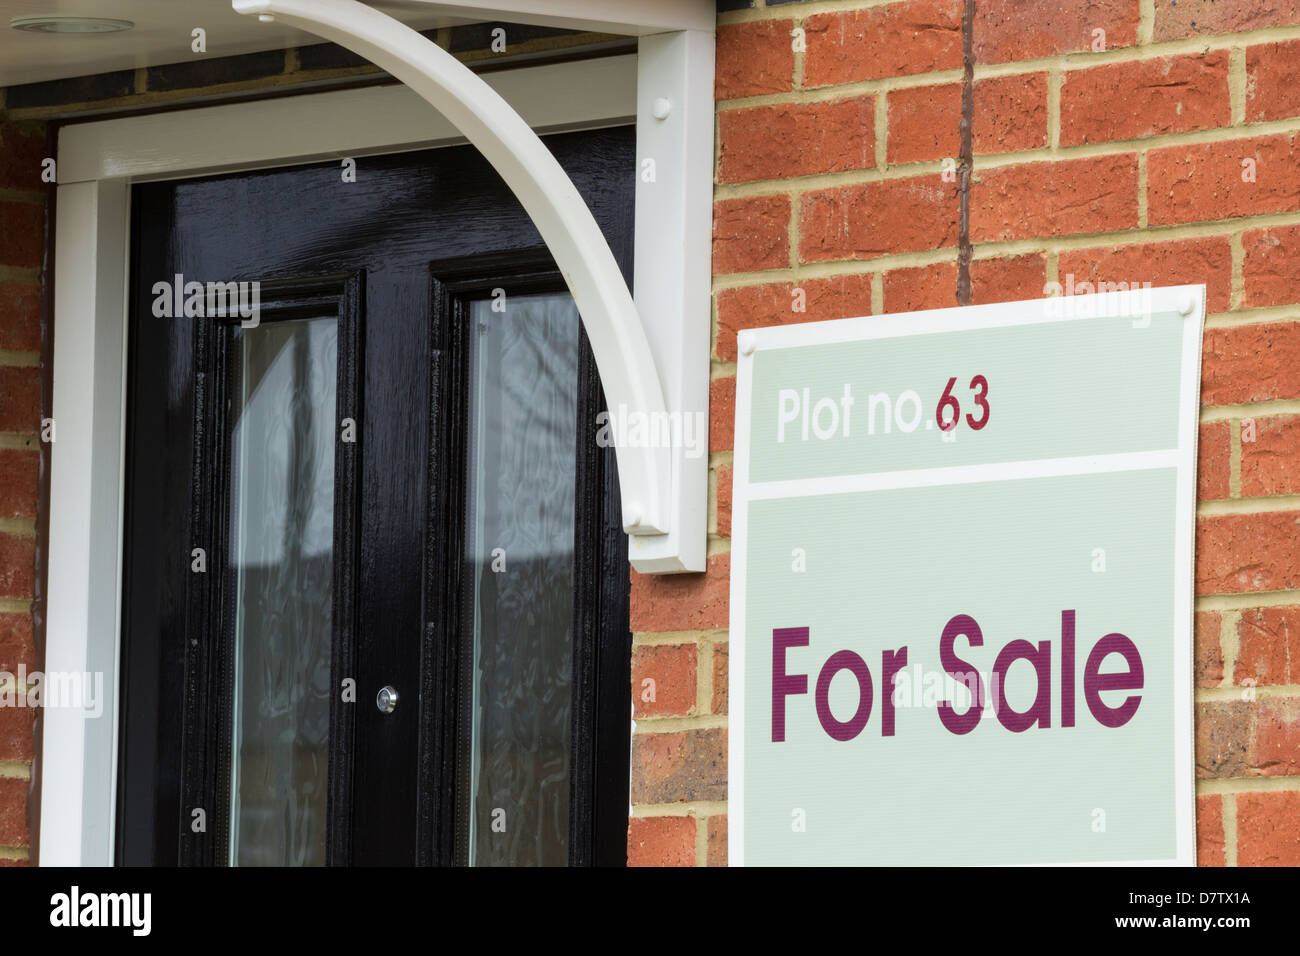 For sale sign on new new property. UK Stock Photo